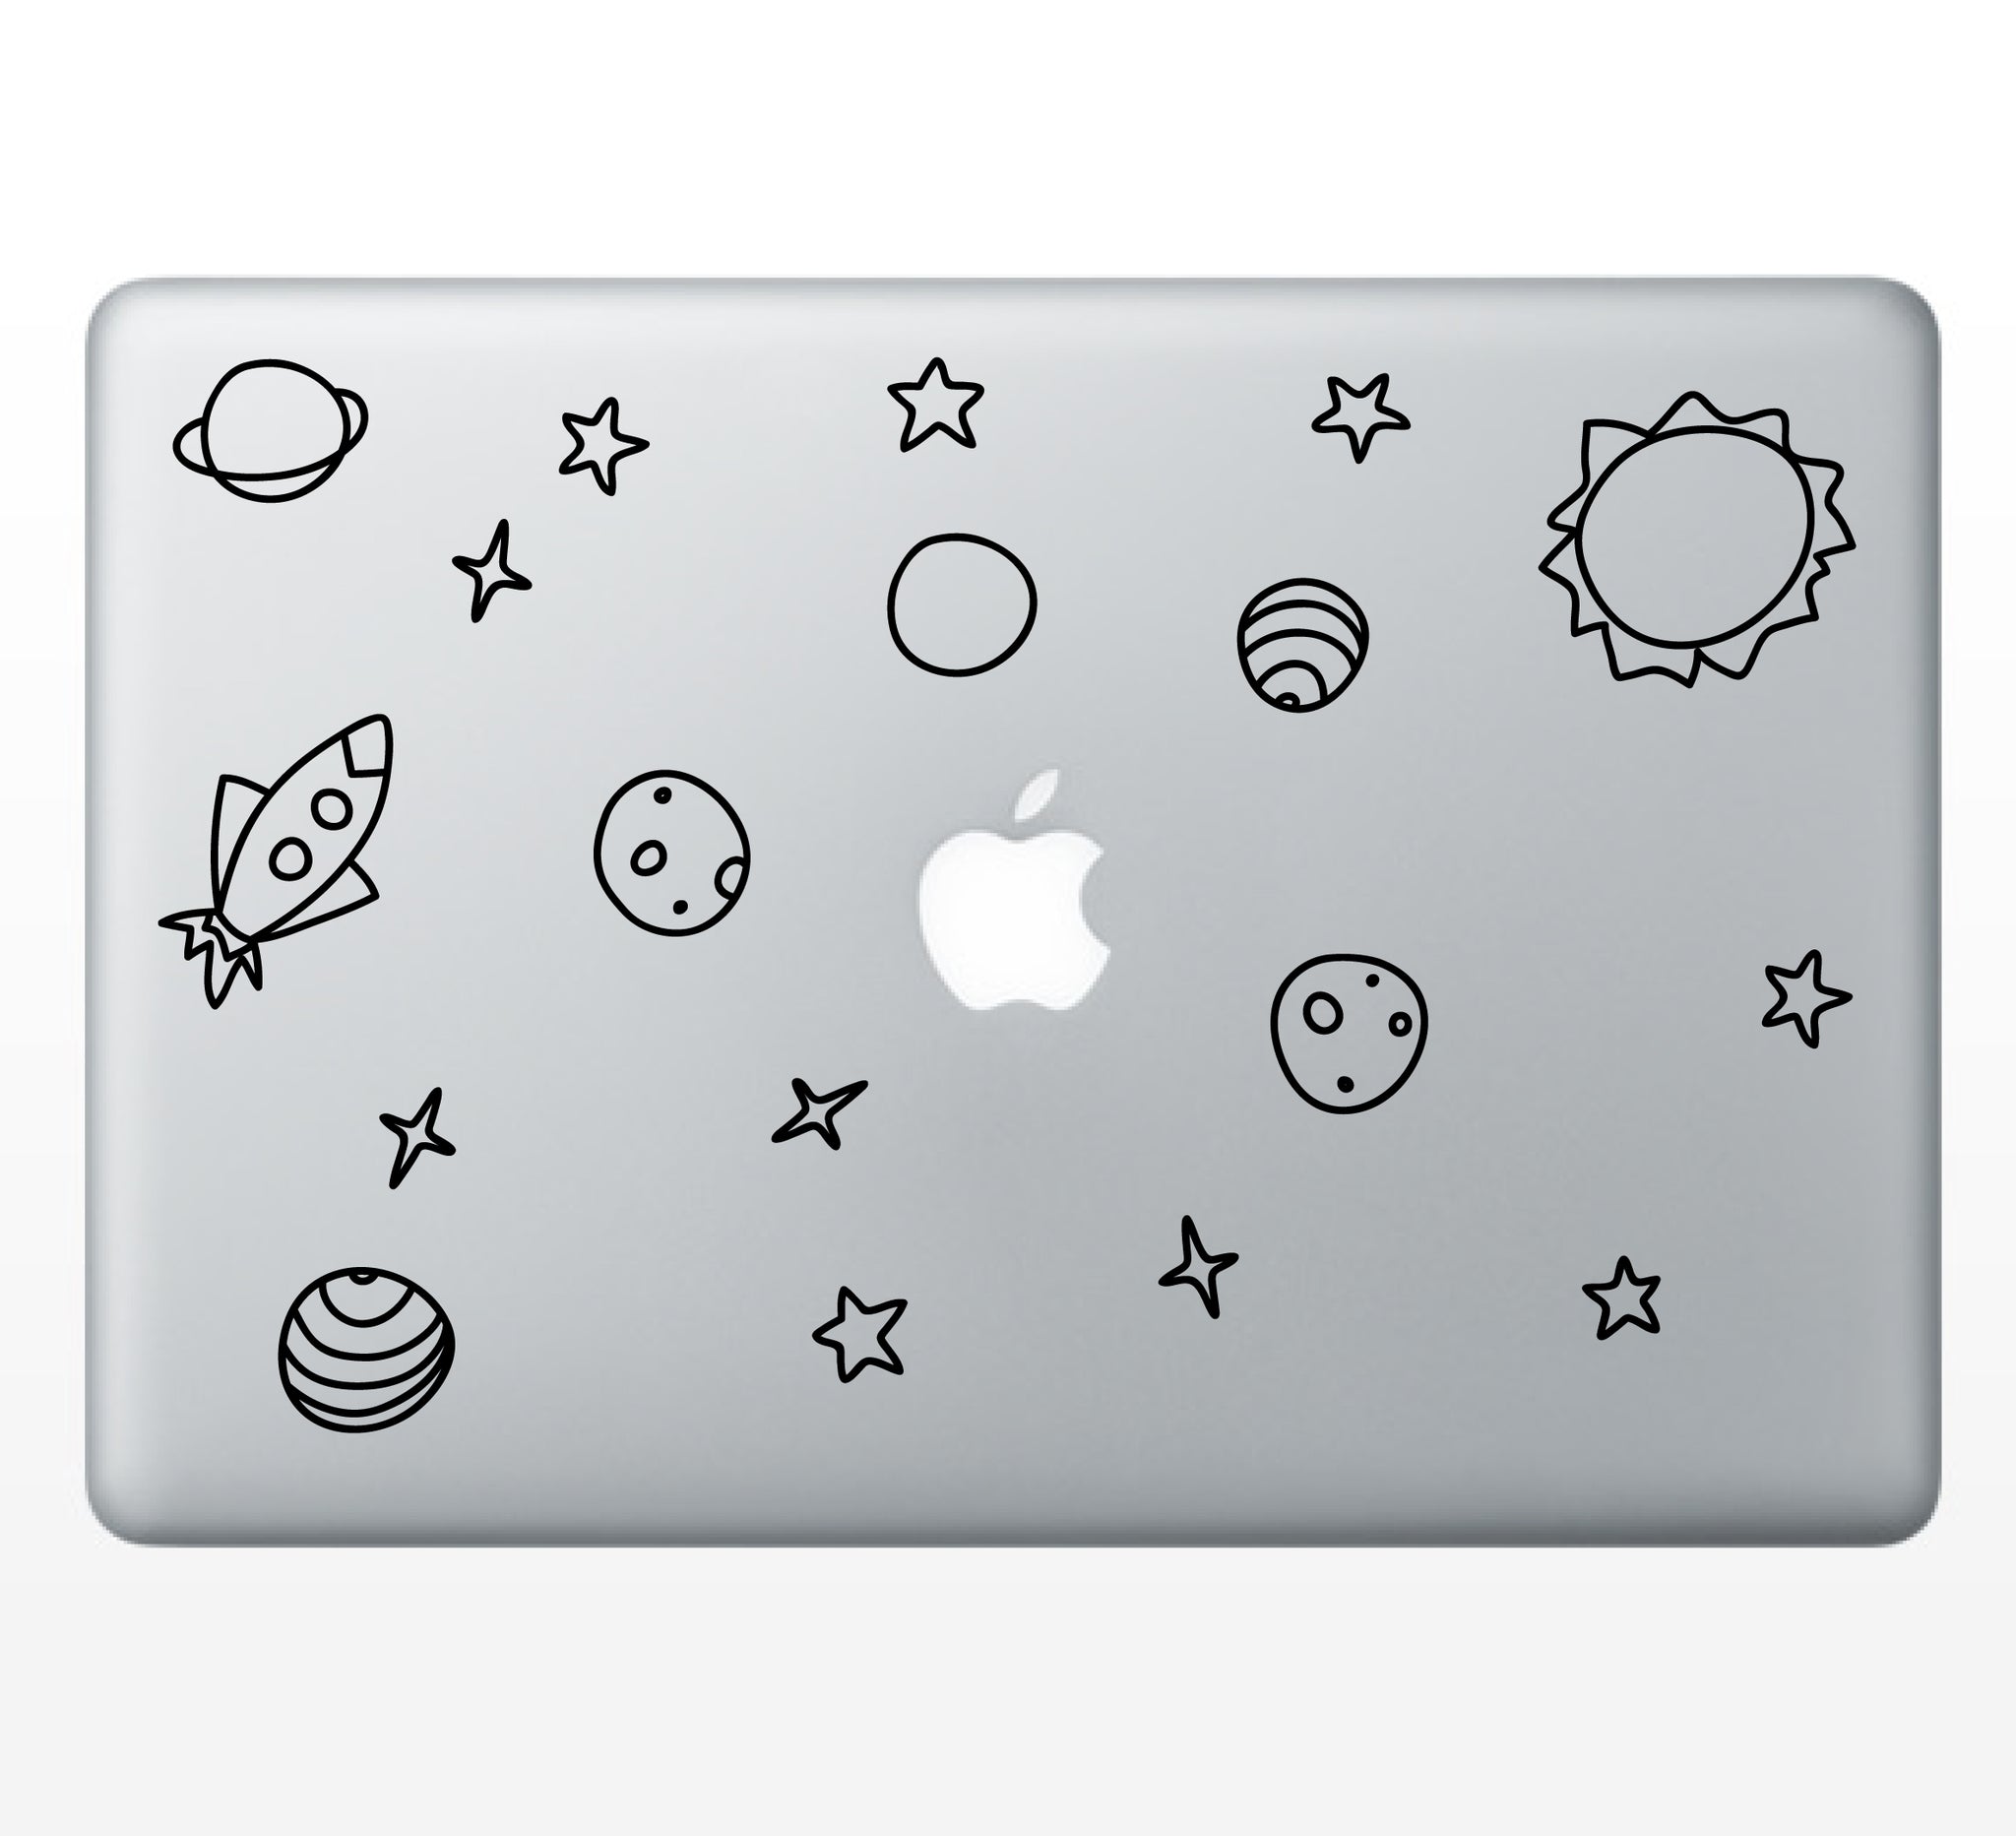 Space Decal